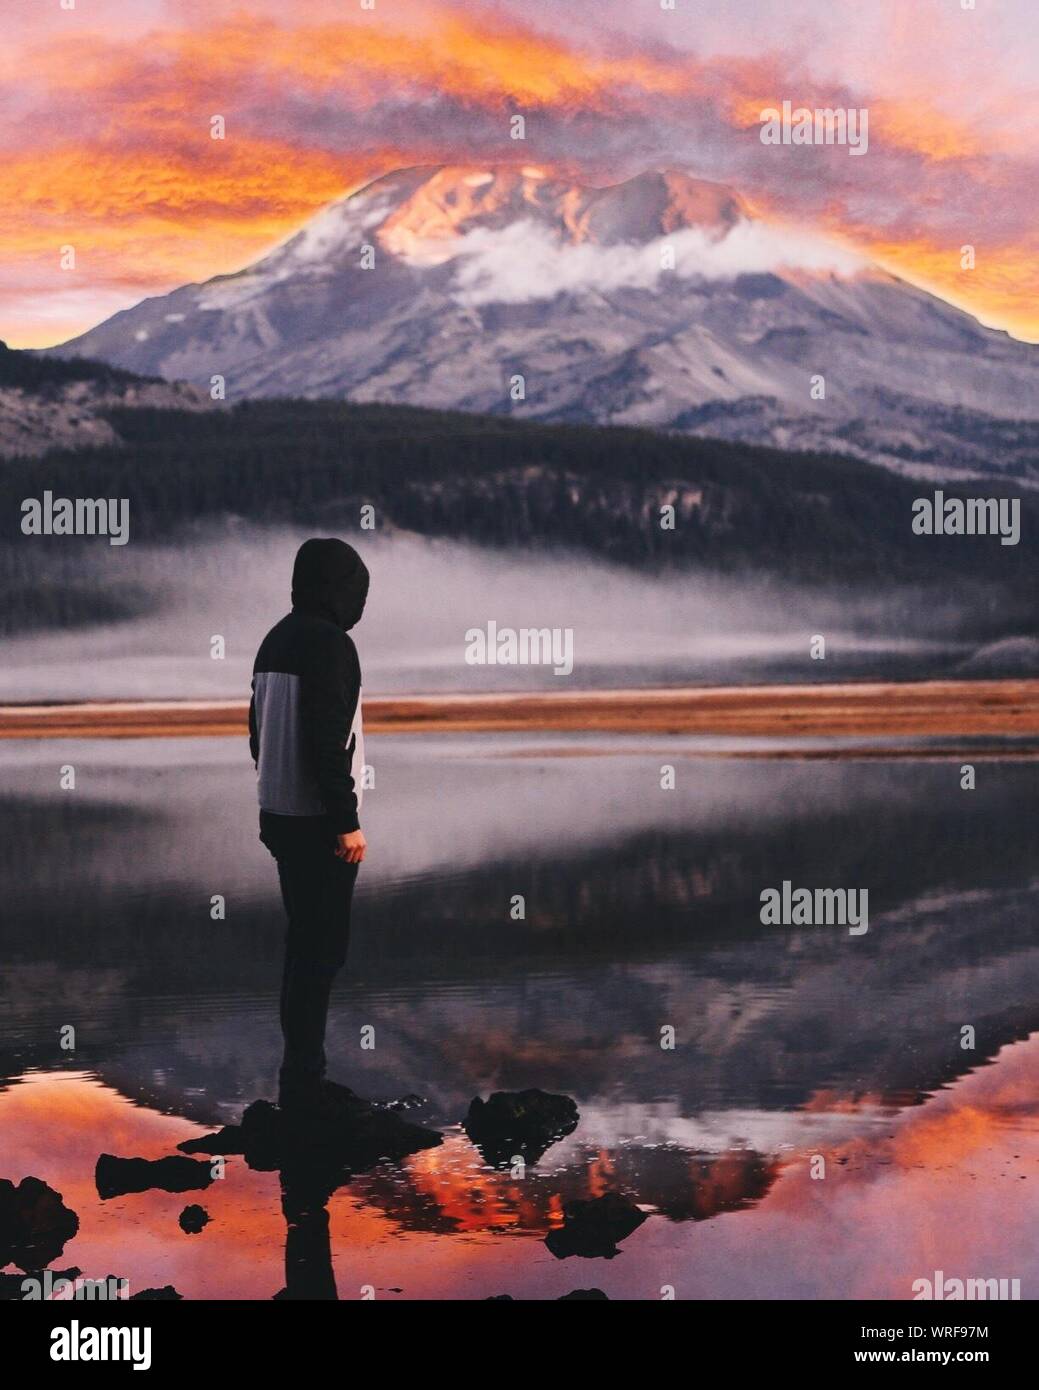 Man Standing On Rock In Sparks Lake Against Mountain During Sunset Stock Photo